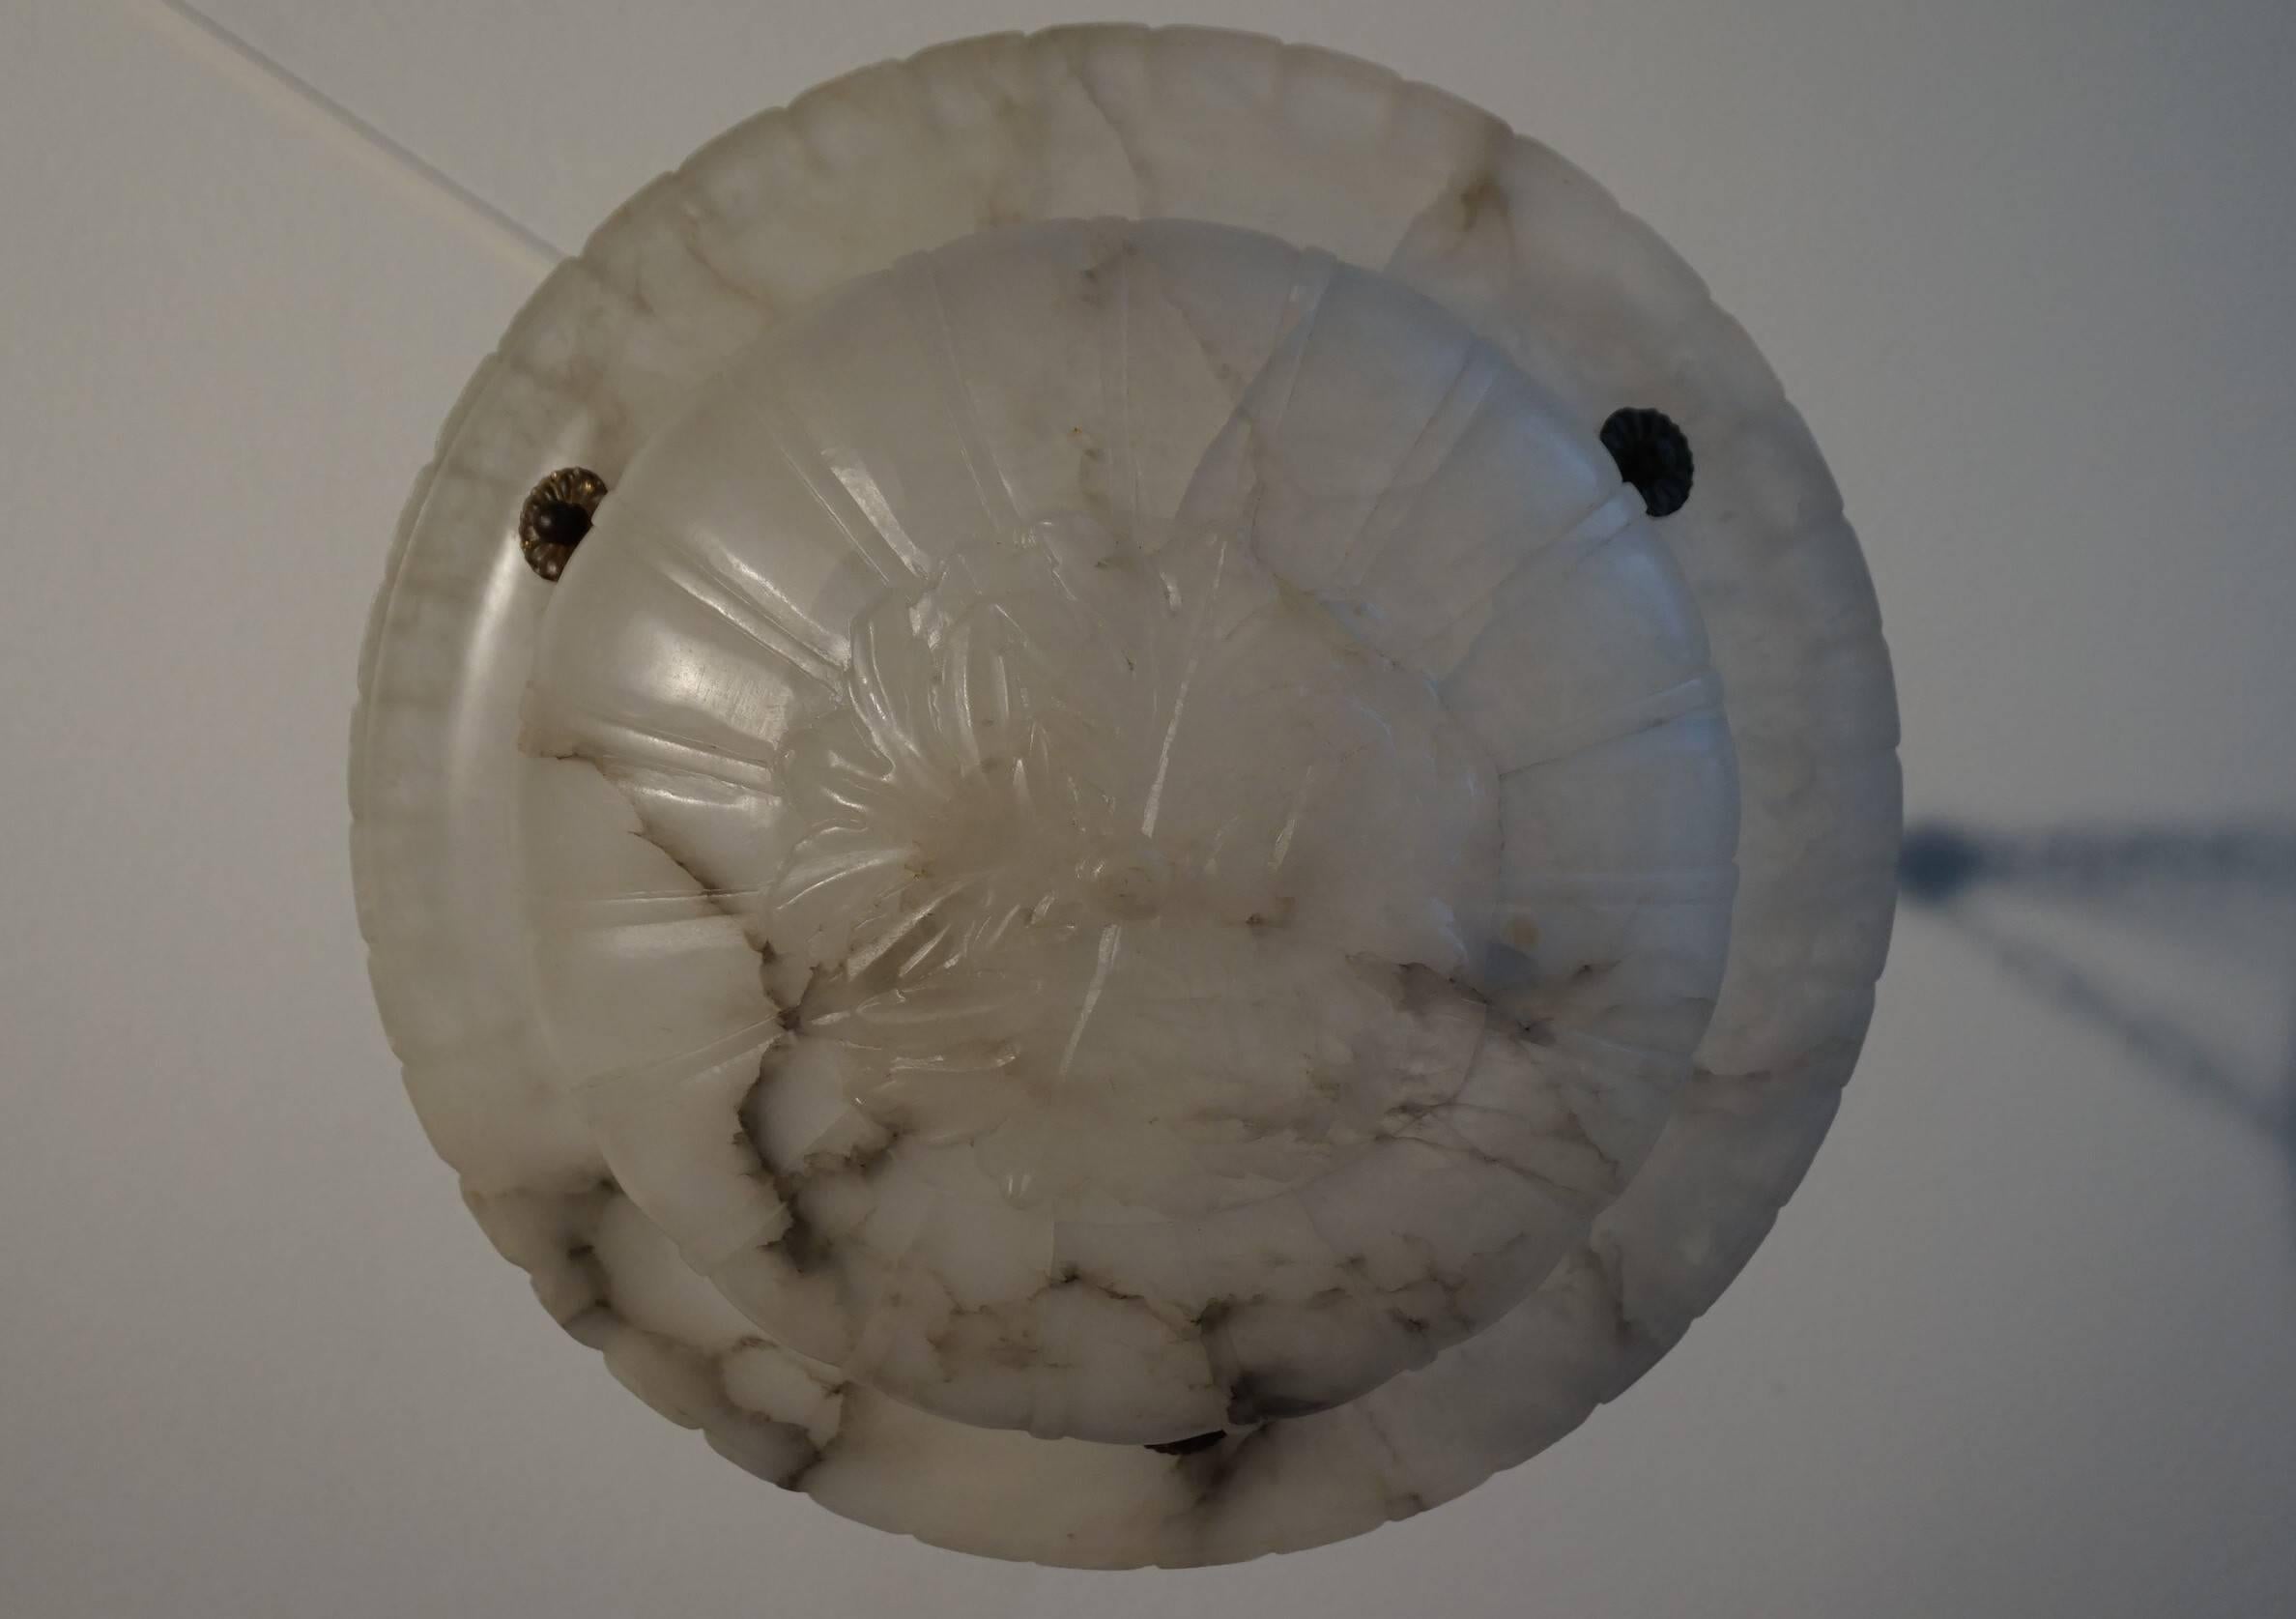 Neoclassical Revival Near Translucent White Neoclassical Alabaster & Chain Pendant / Ceiling Lamp For Sale